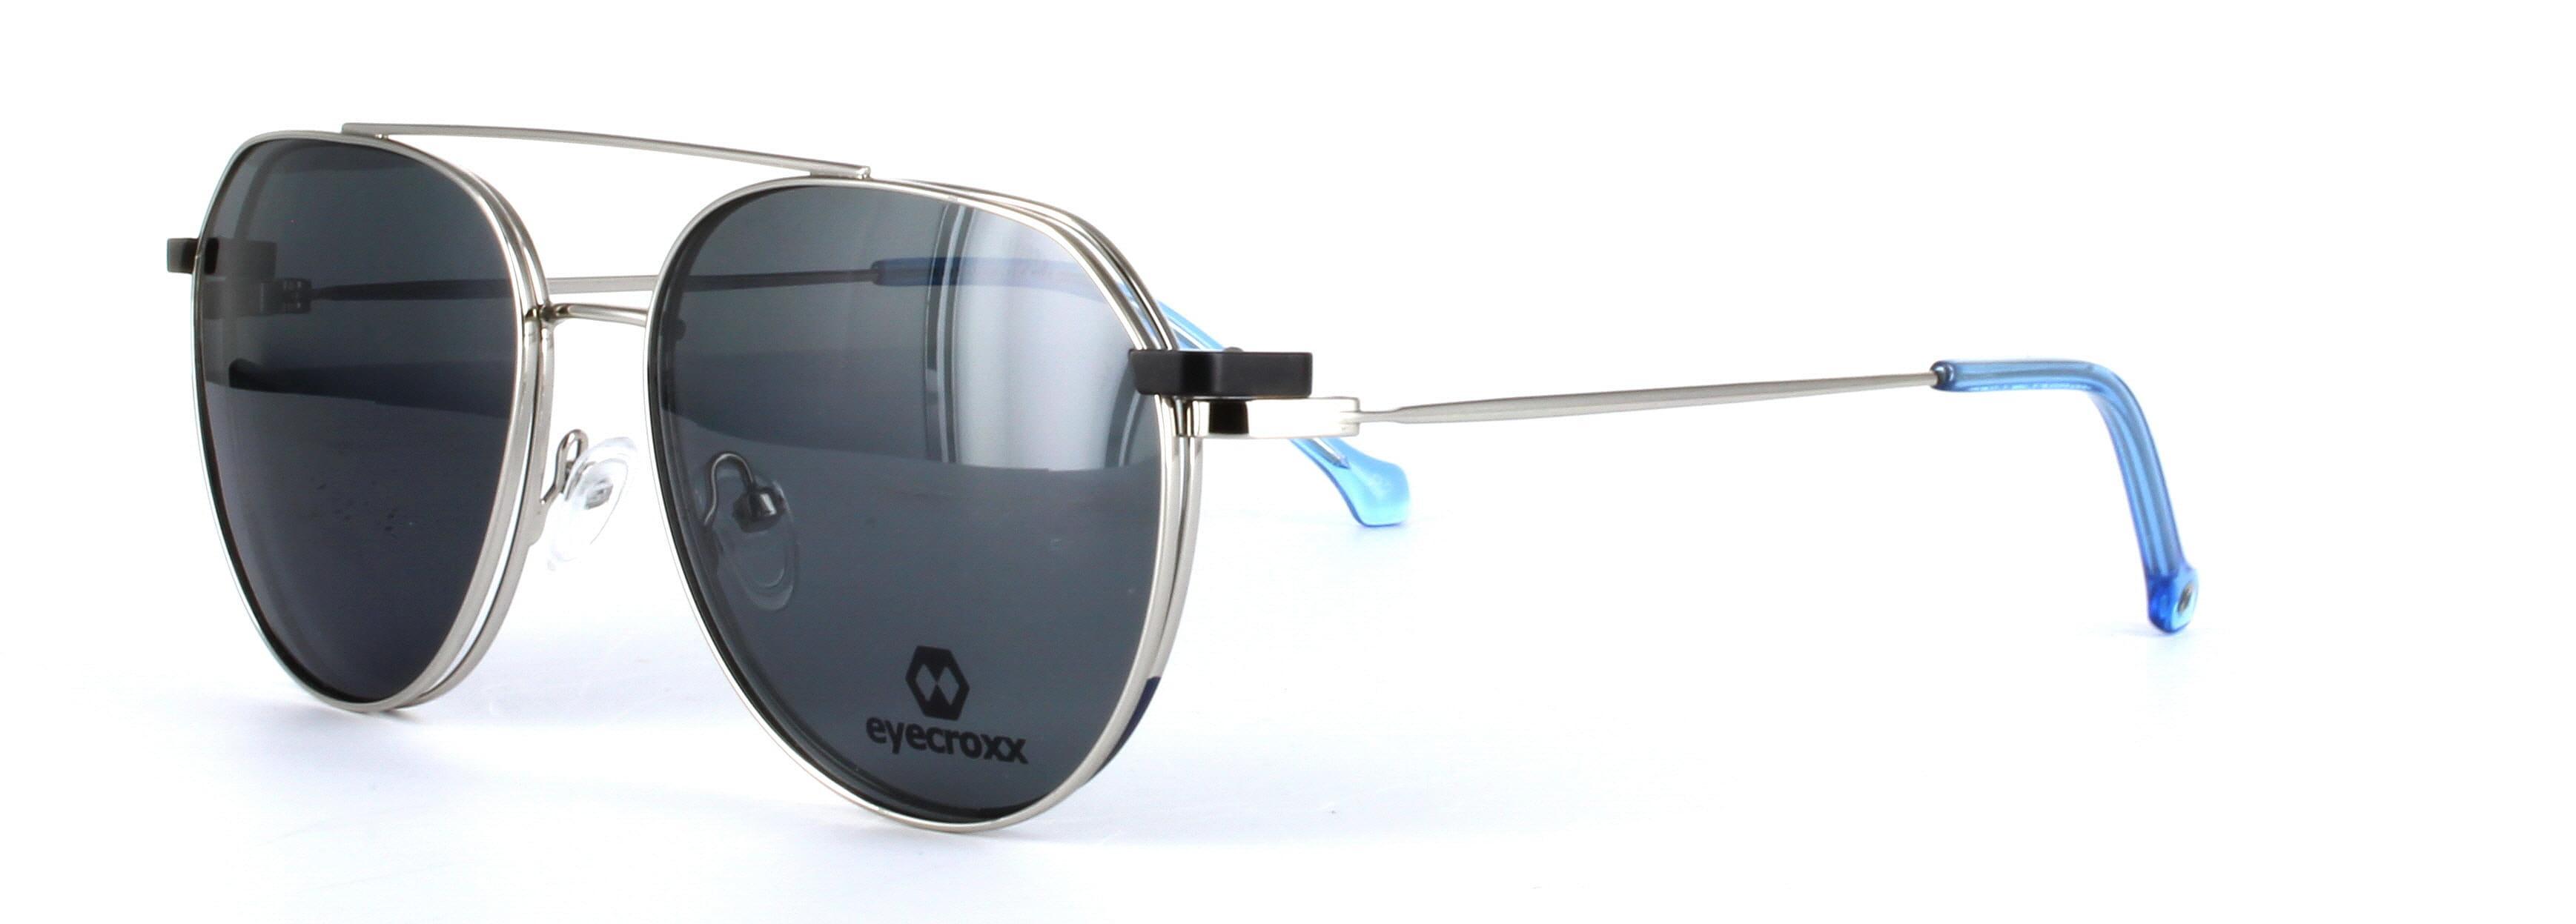 Eyecroxx 612-C3 Silver and Blue Full Rim Metal Glasses - Image View 2